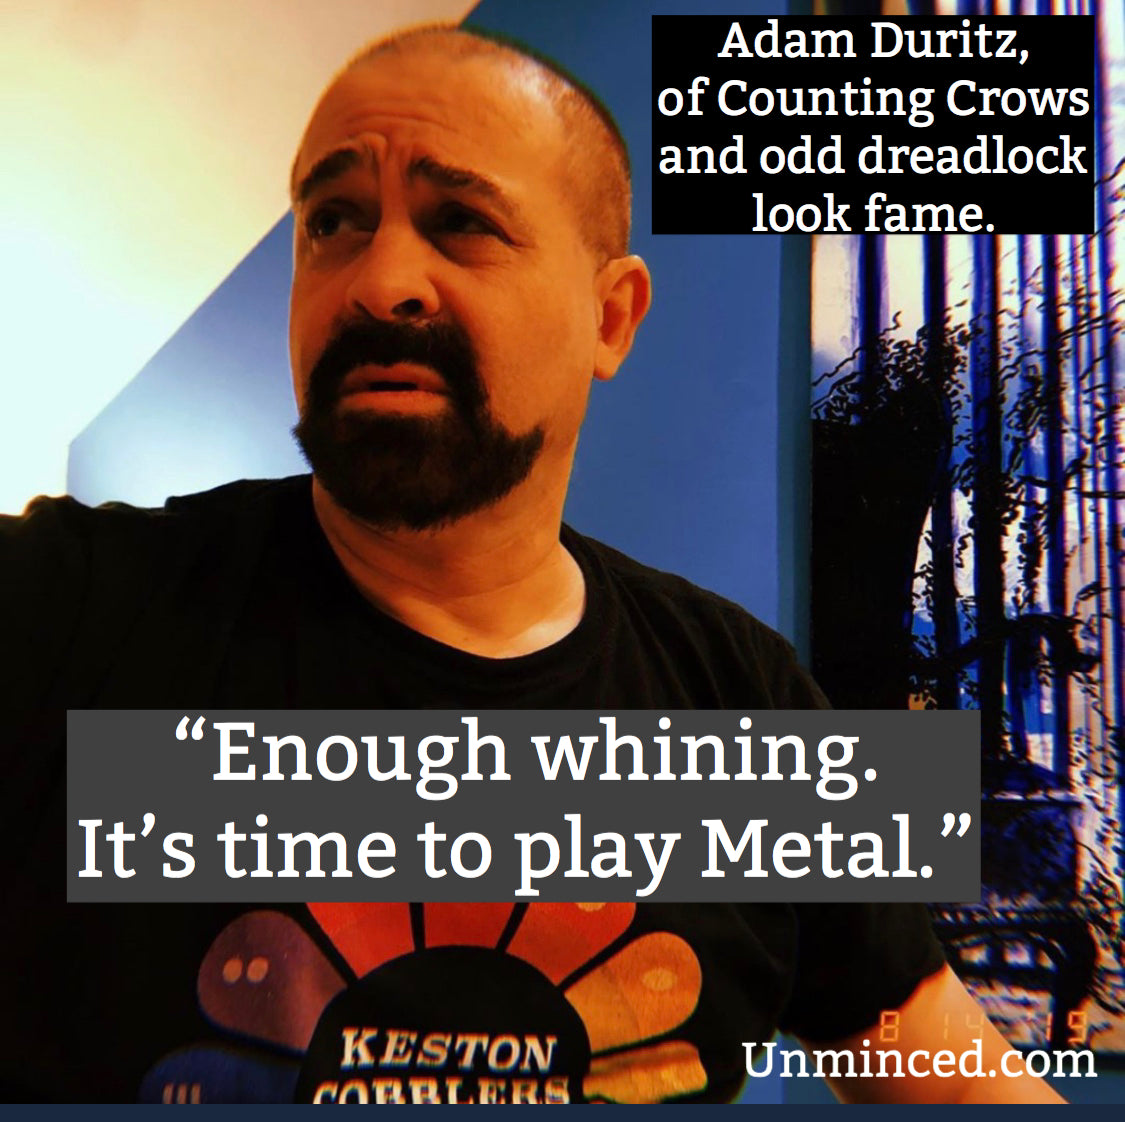 Adam Duritz goes hardcore. “Enough whining. It’s time to play metal.”